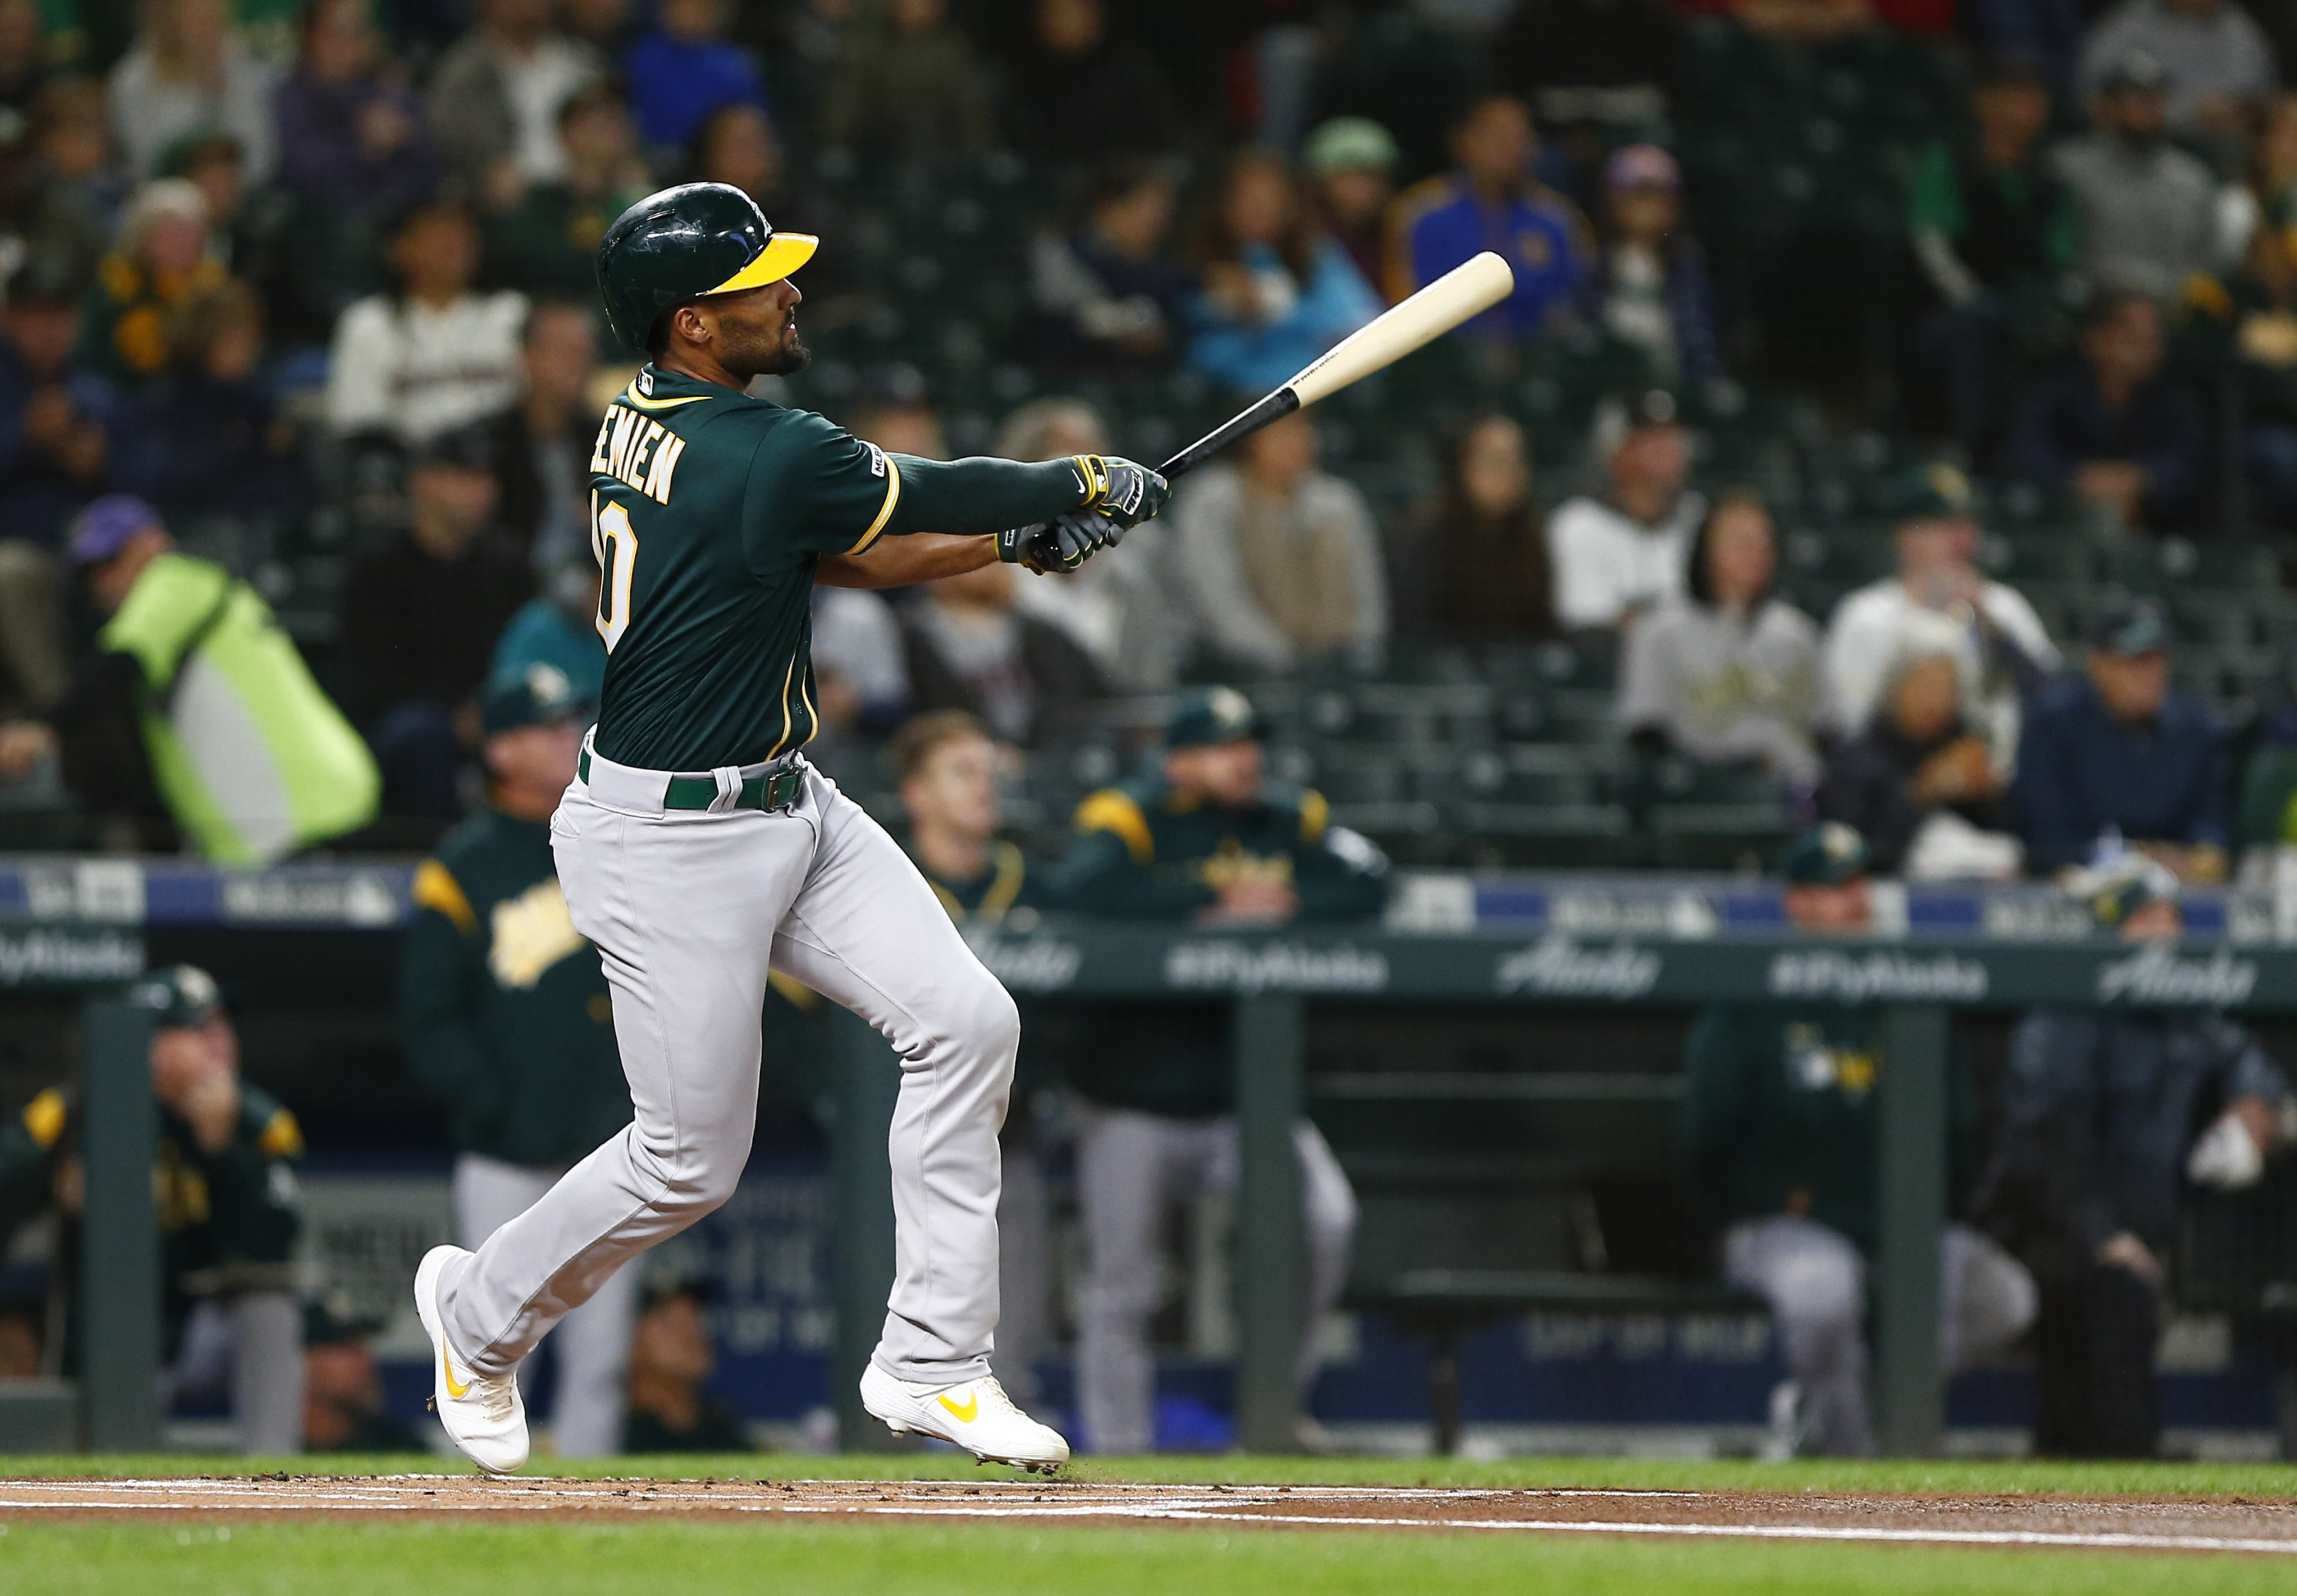 Oakland A's owe their resurgence to players like Marcus Semien